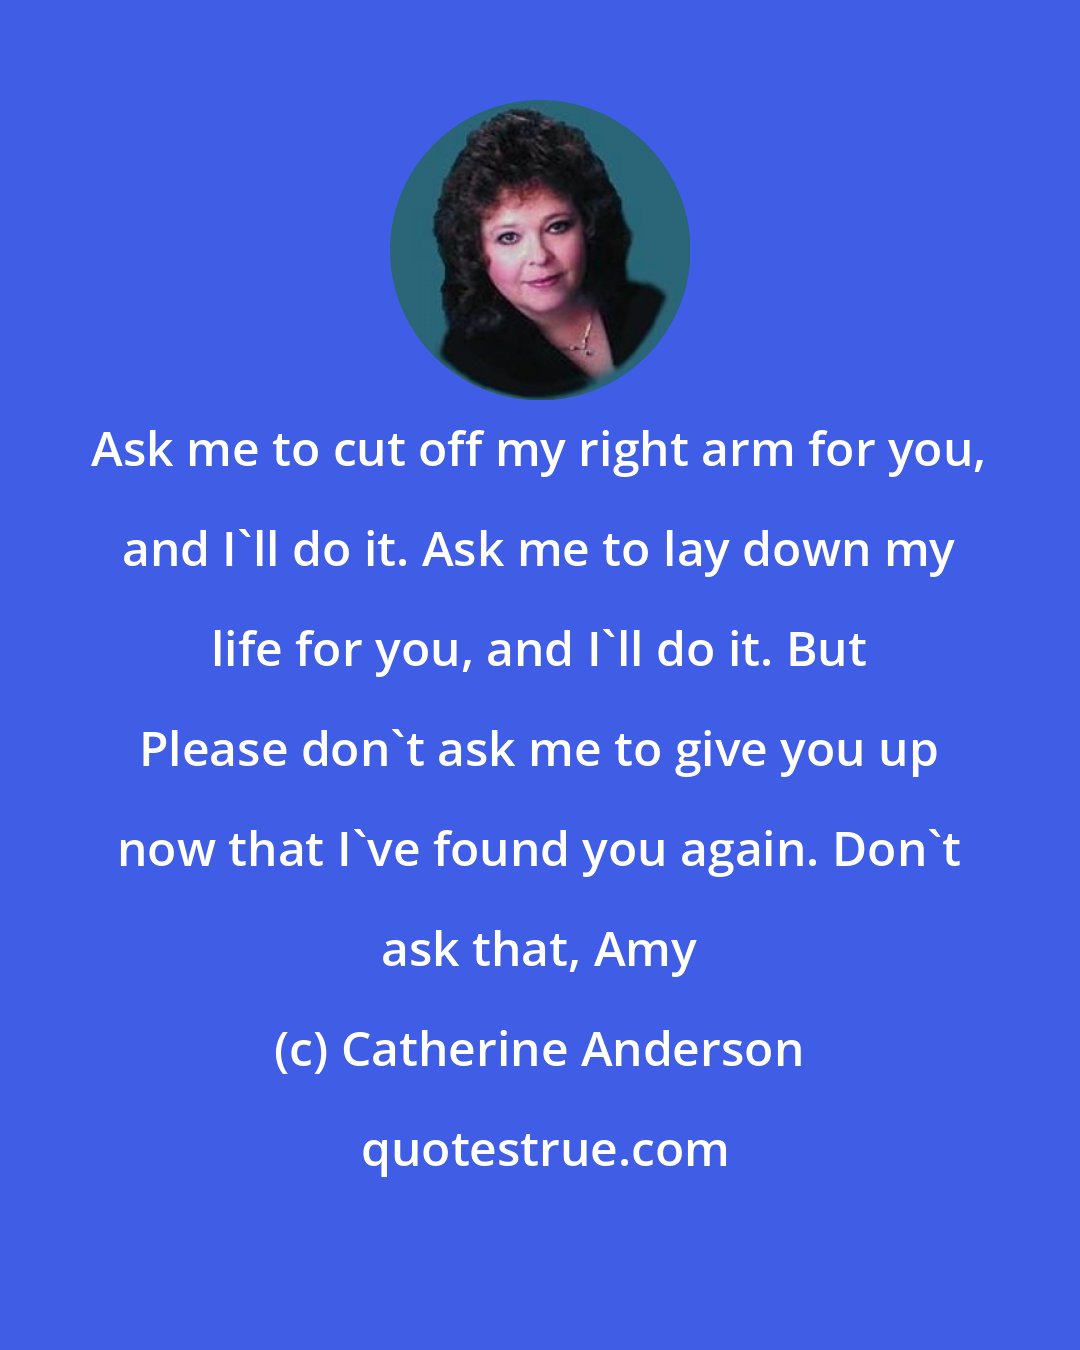 Catherine Anderson: Ask me to cut off my right arm for you, and I'll do it. Ask me to lay down my life for you, and I'll do it. But Please don't ask me to give you up now that I've found you again. Don't ask that, Amy